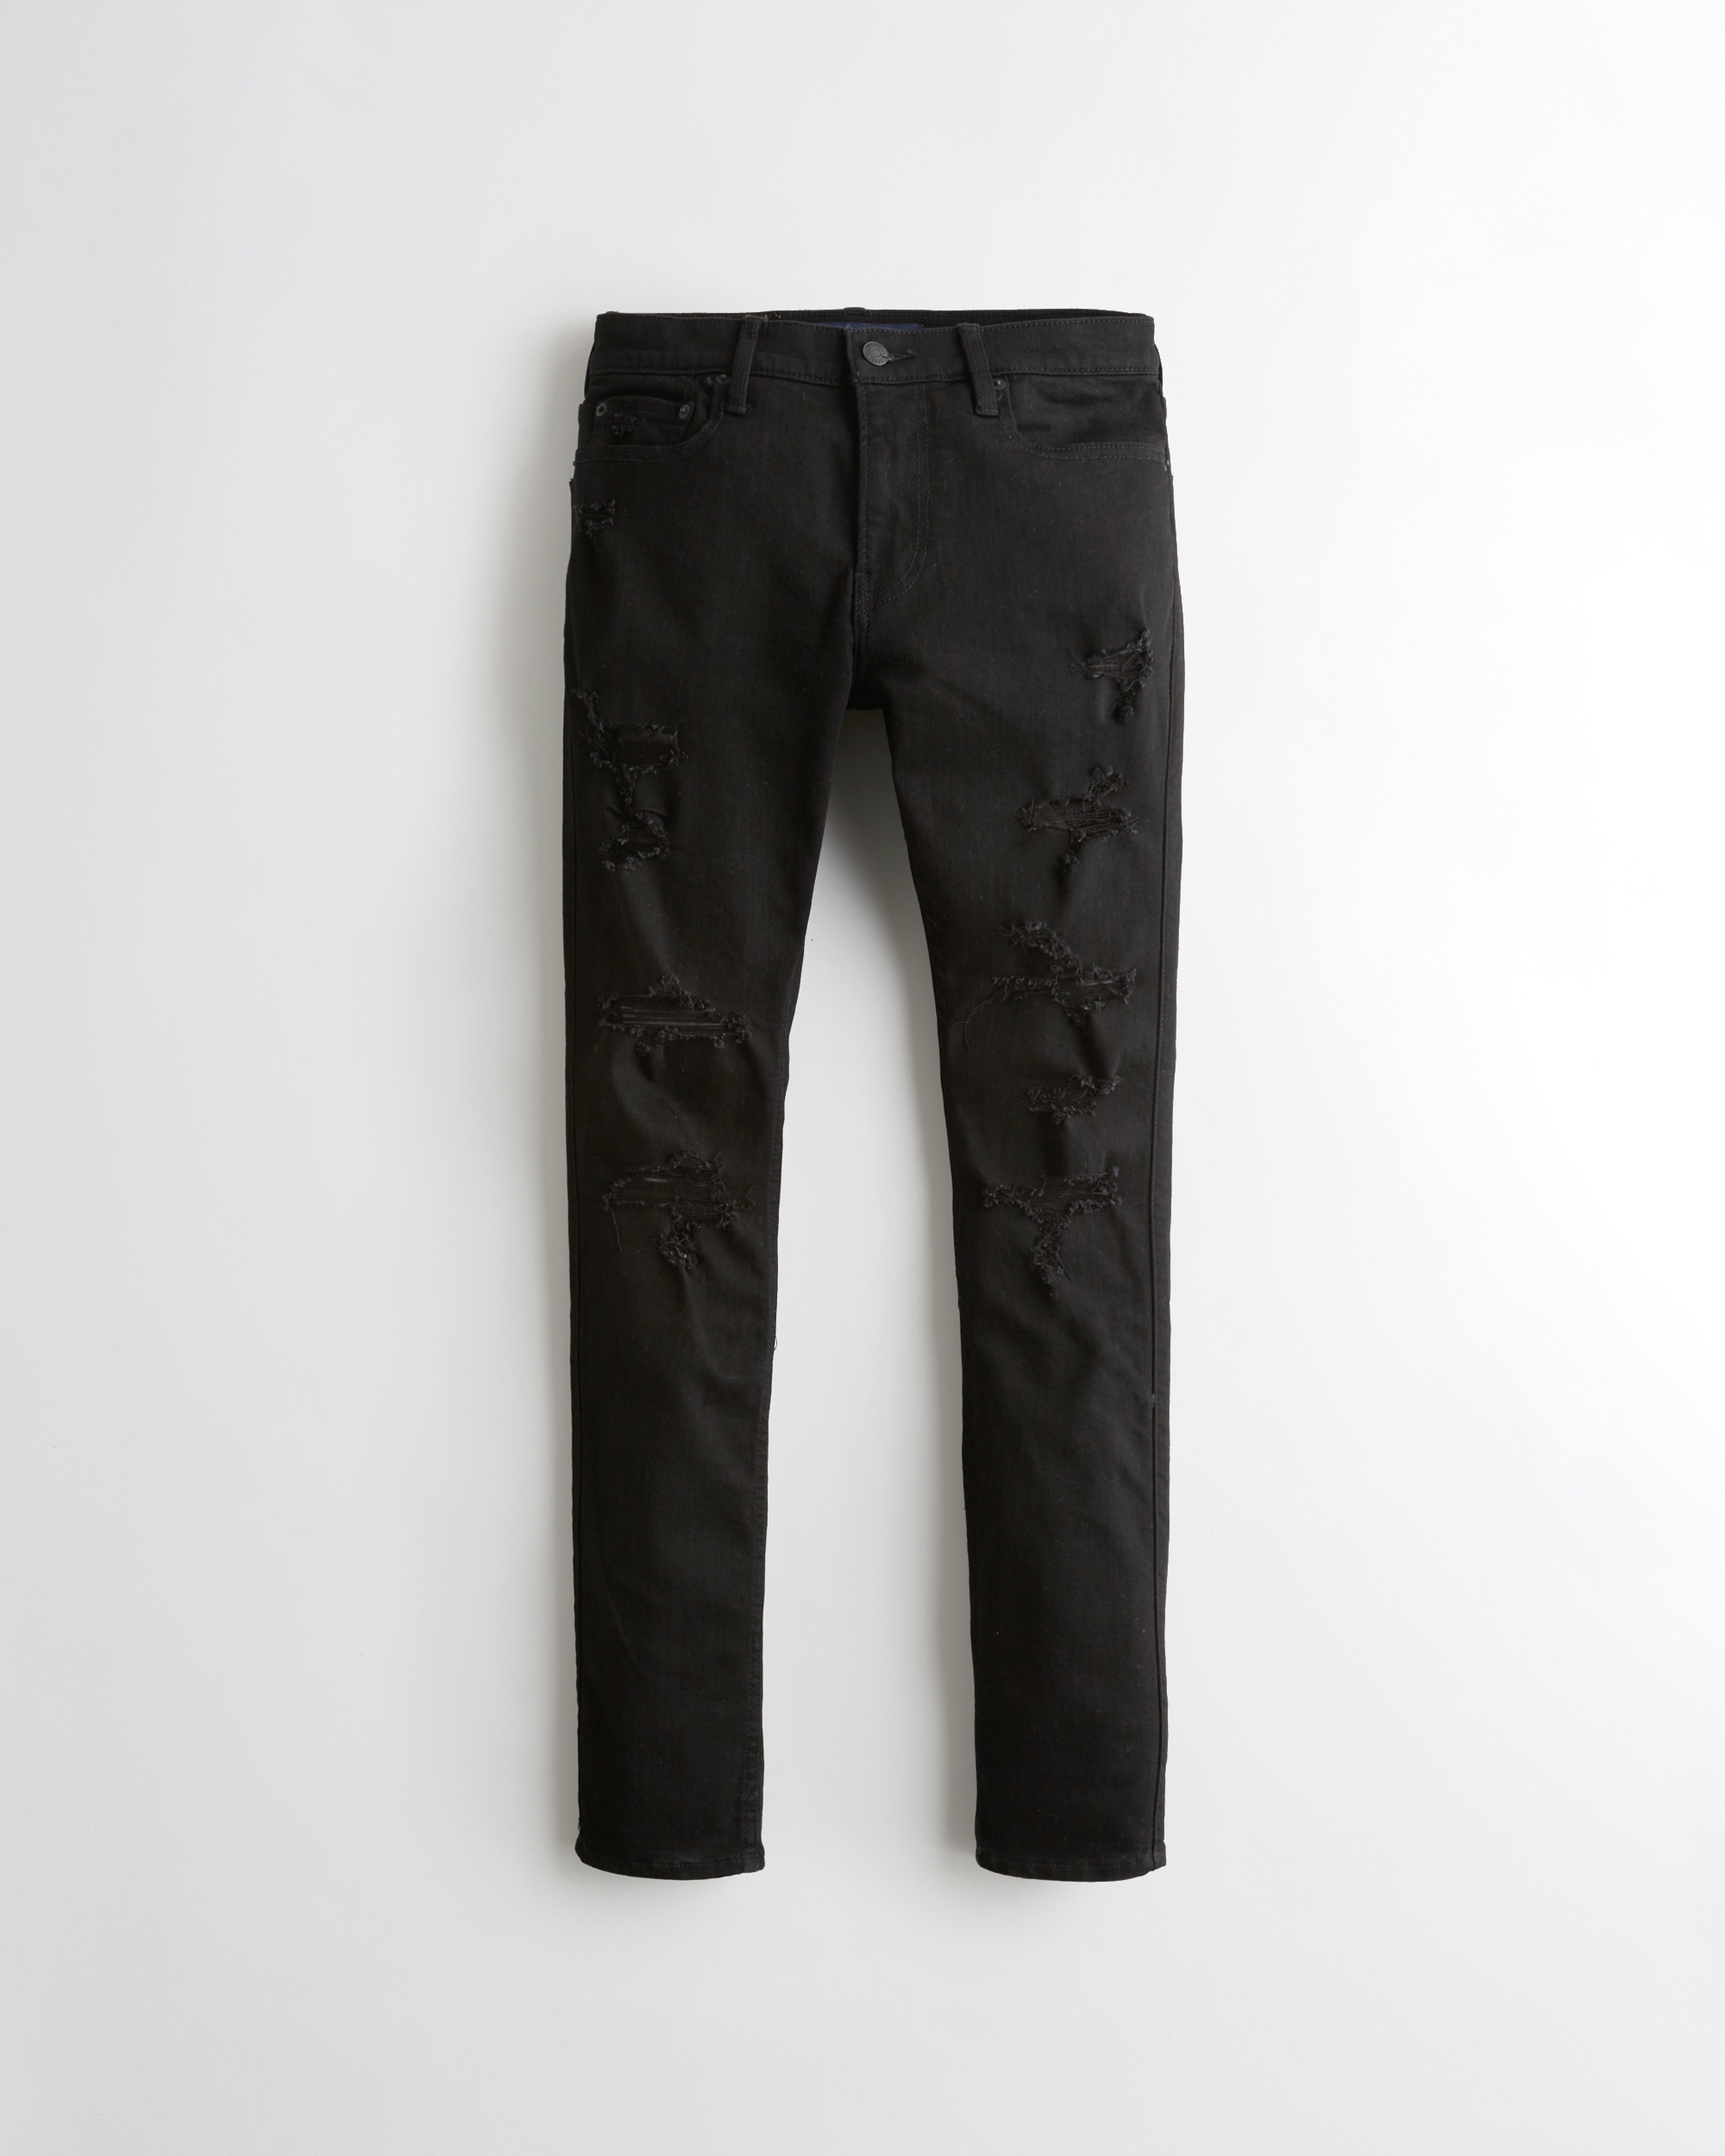 abercrombie fitch extreme skinny jeans